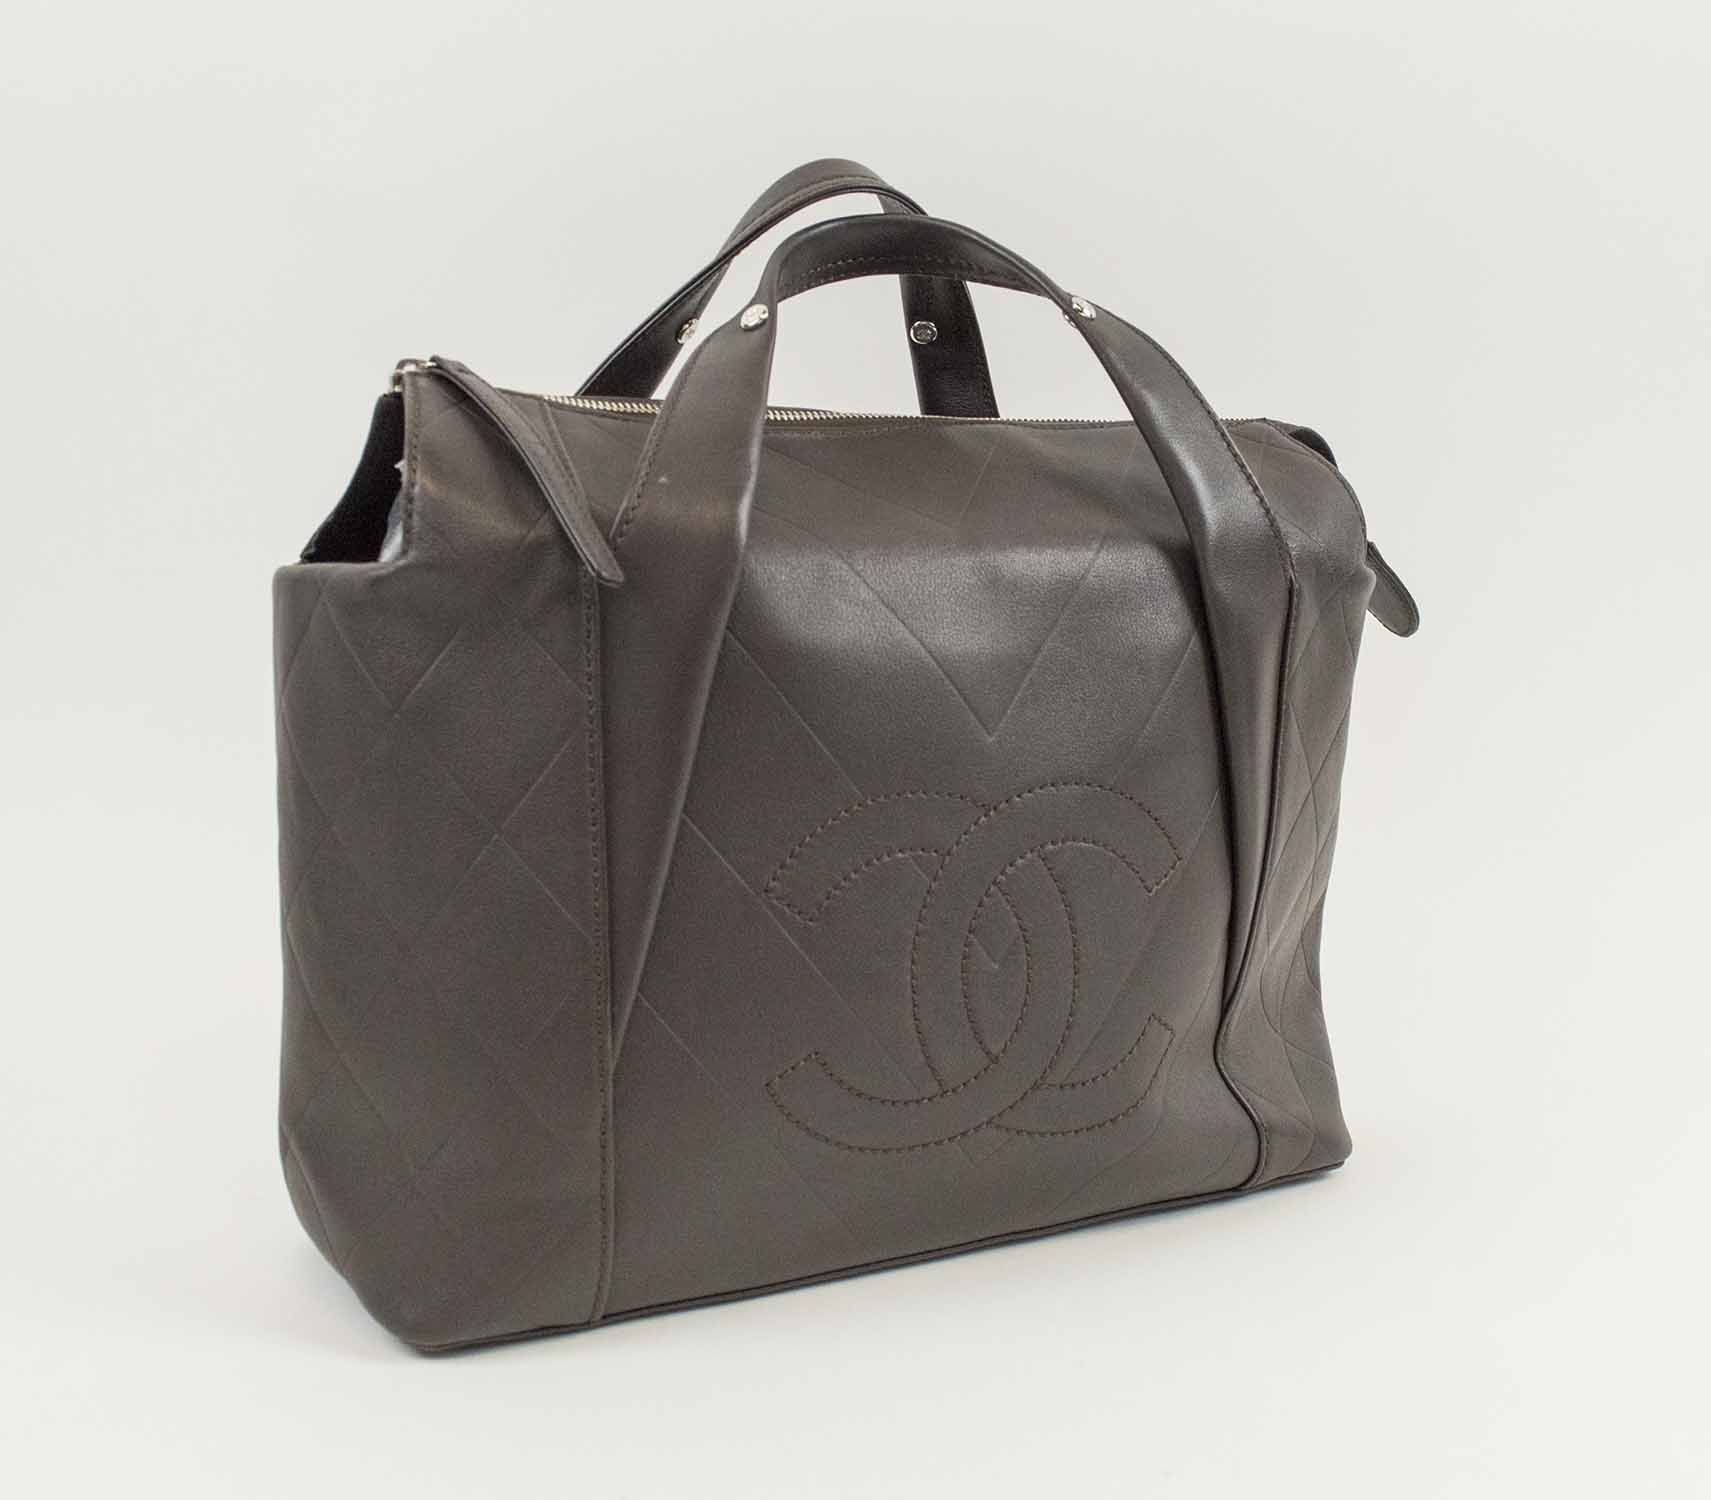 CHANEL TOTE BAG, brown leather with chevron and square quilted pattern all  over, iconic CC logo at the front, silver tone hardware and detailing, top  zip closure, two top handles, 2006-2008, matching